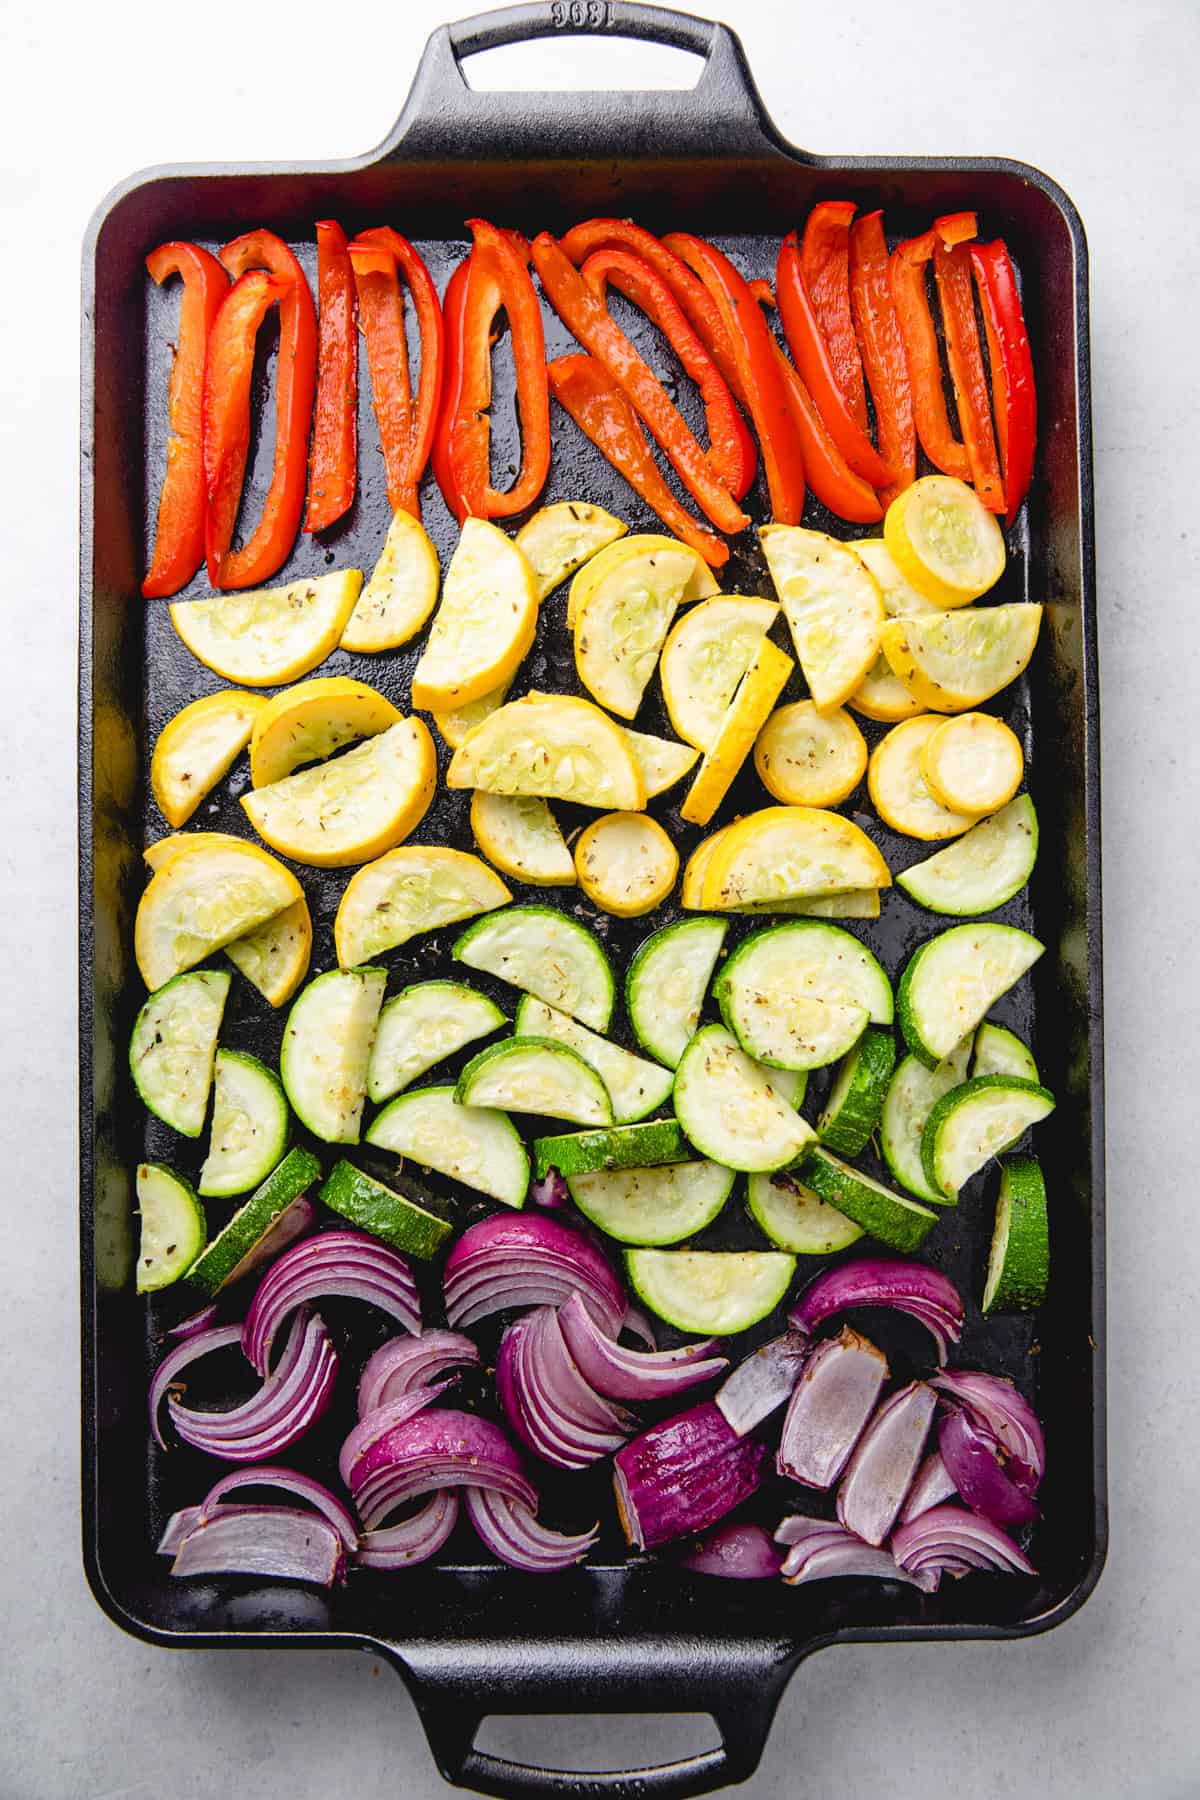 Diced red bell pepper, red onion, zucchini, and yellow squash on a baking sheet.